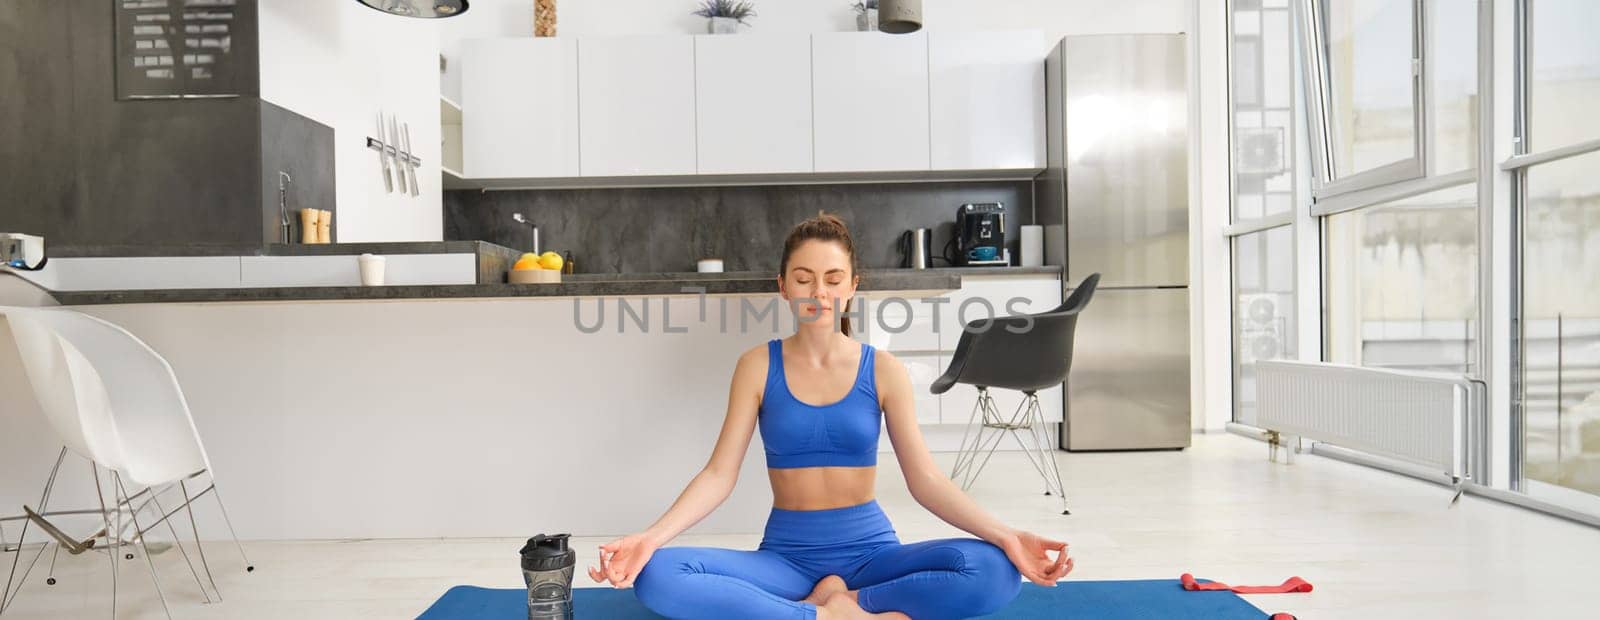 Fitness and mindfulness. Young woman doing yoga, sitting at home and meditating, close eyes and sits in asana pose on rubber mat.